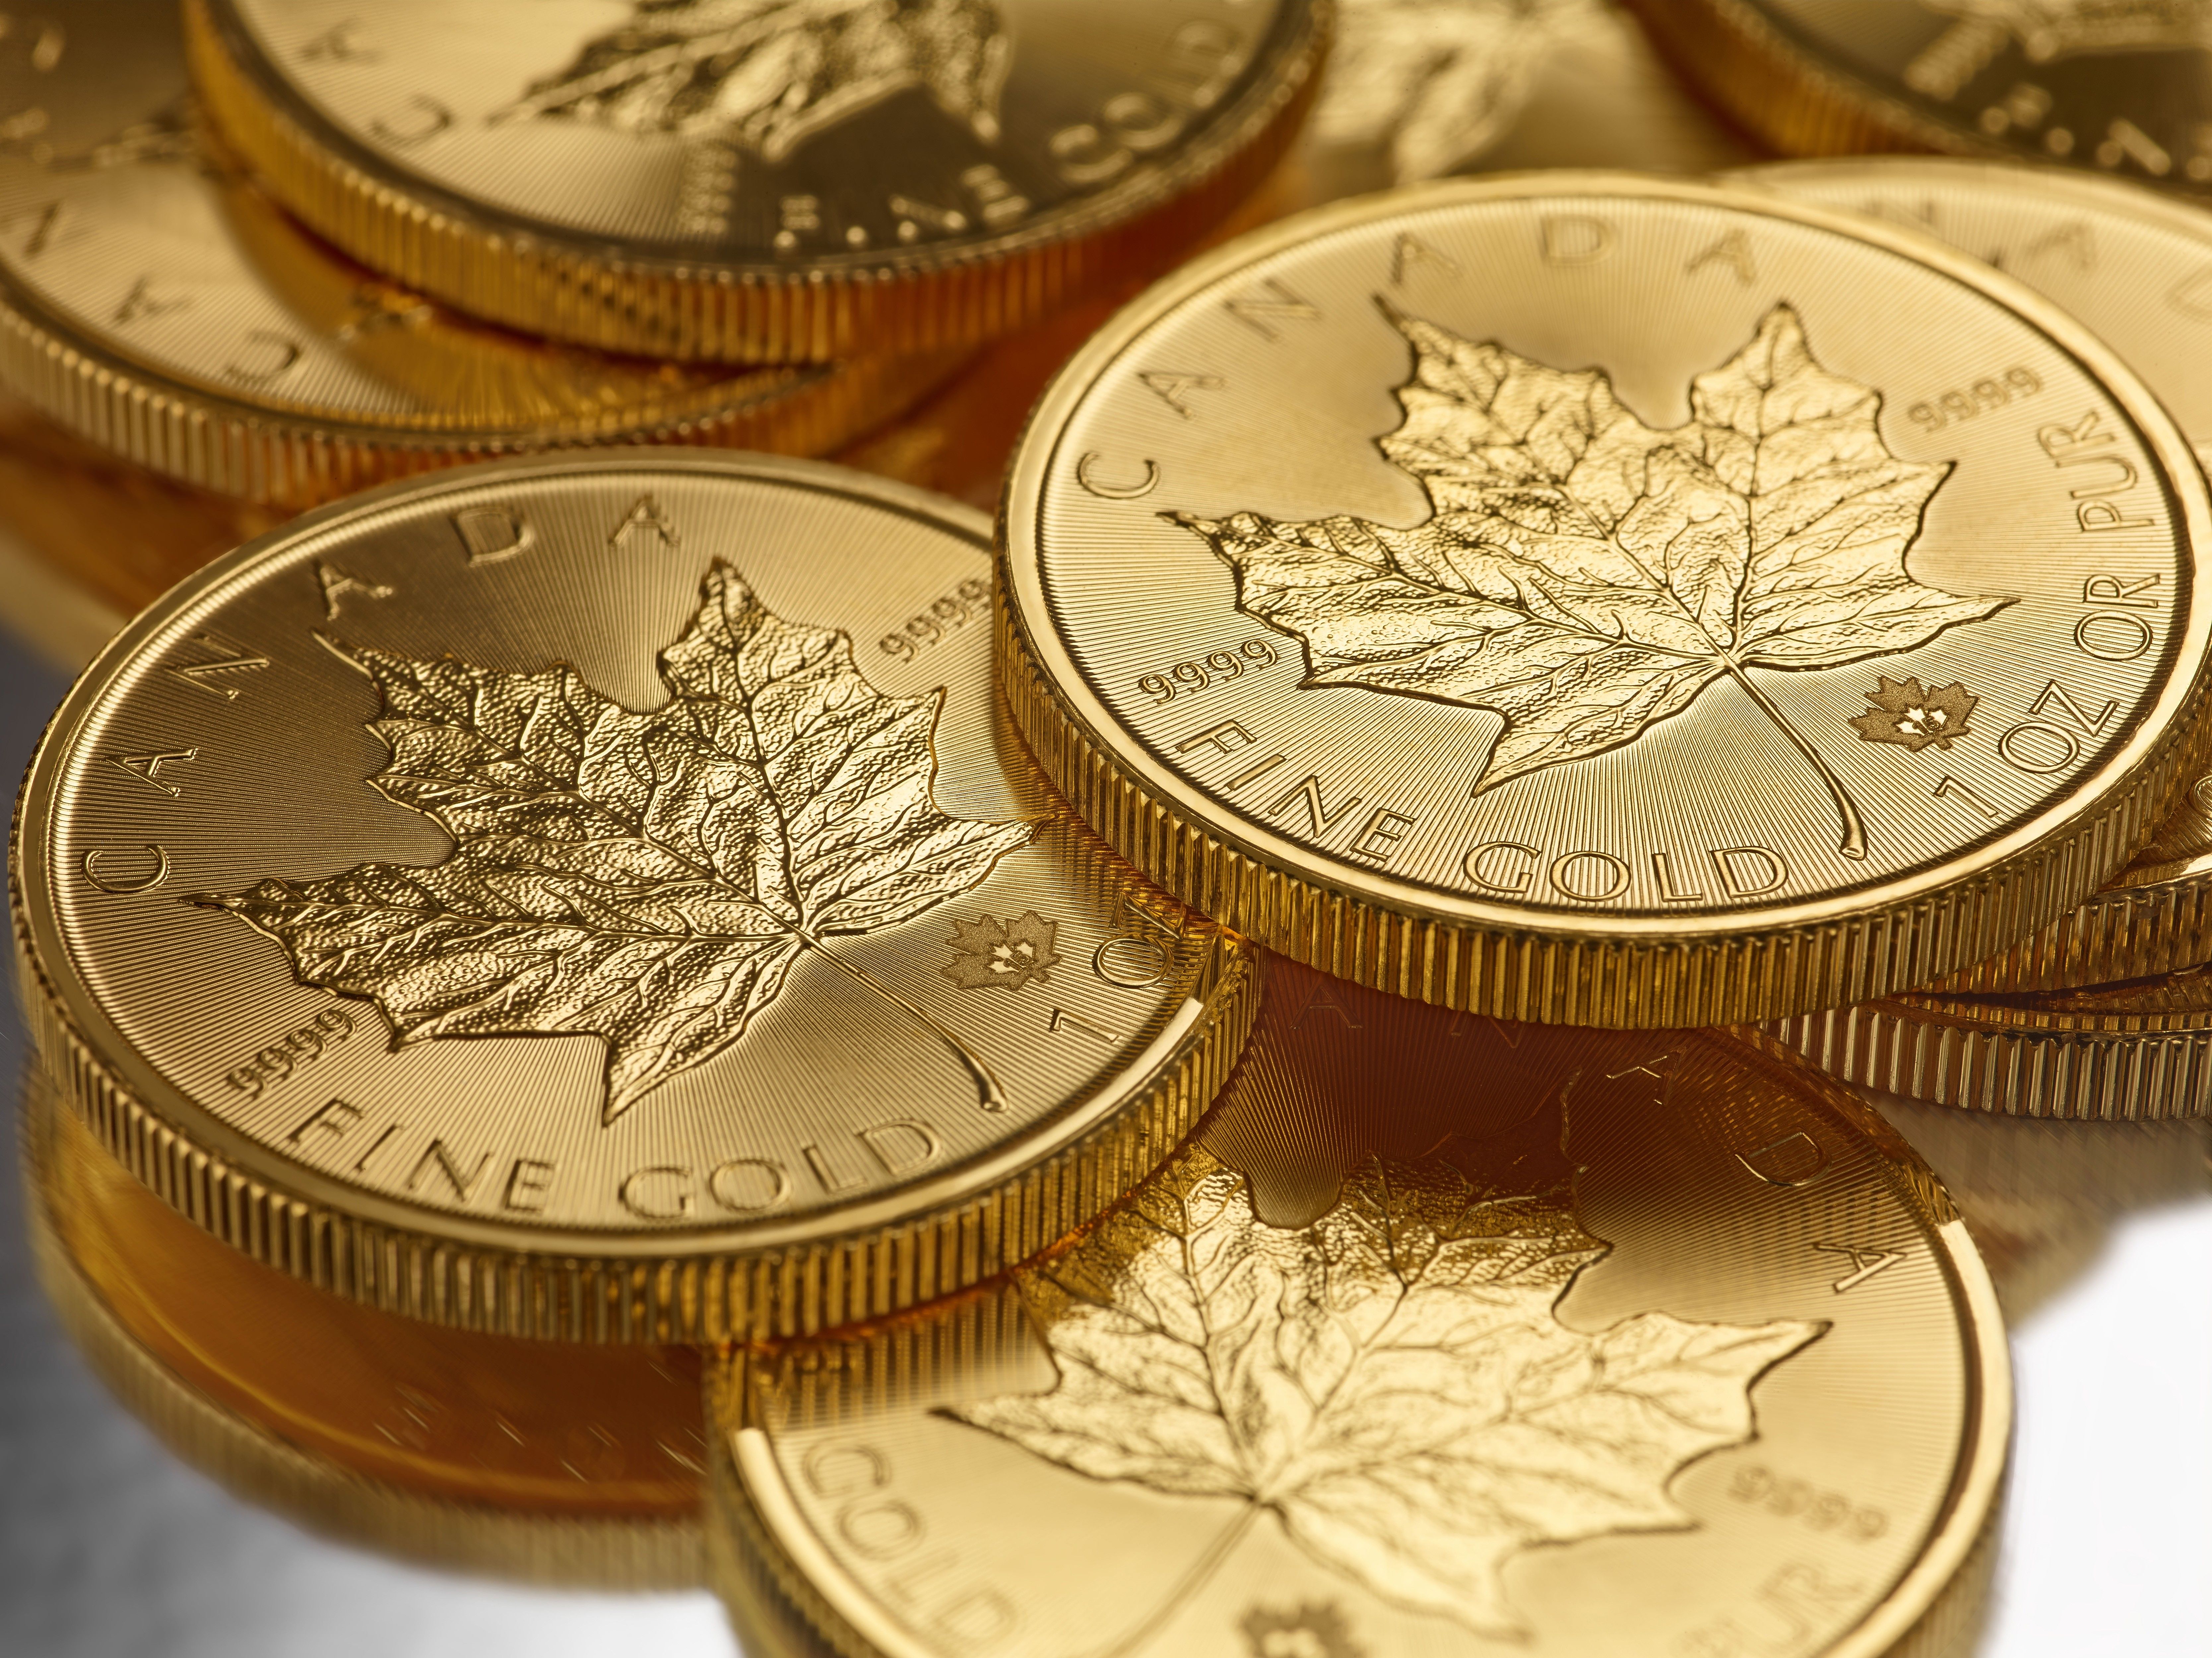 Gold Coins Canada wallpaper and image, picture, photo